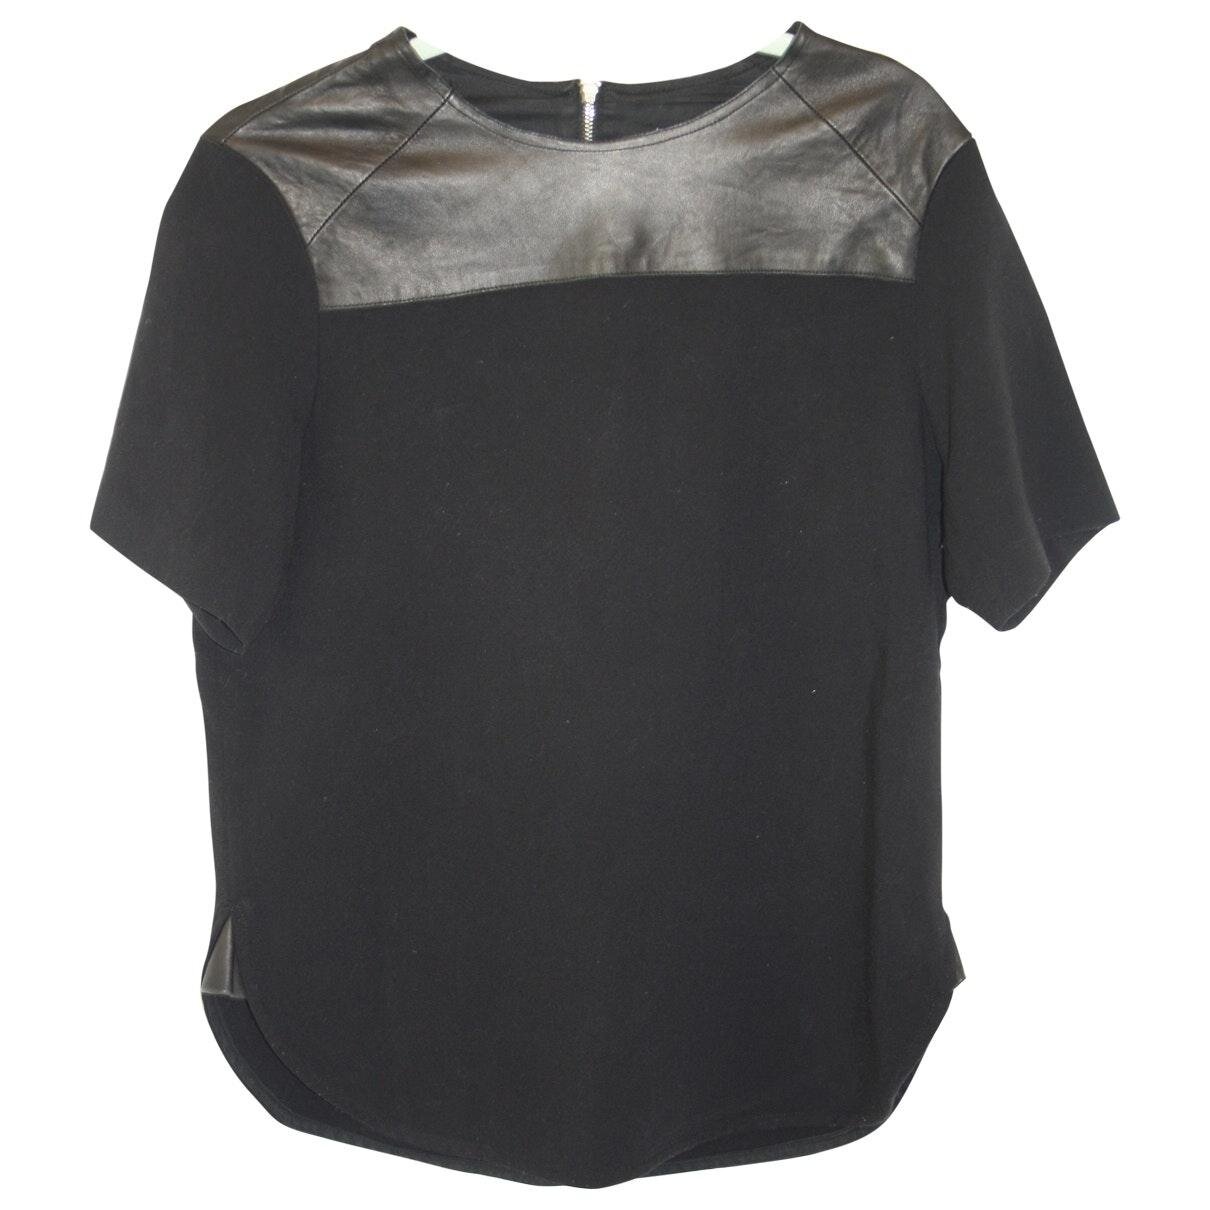 Sandro T-Shirt with Leather Panel in Black.jpg